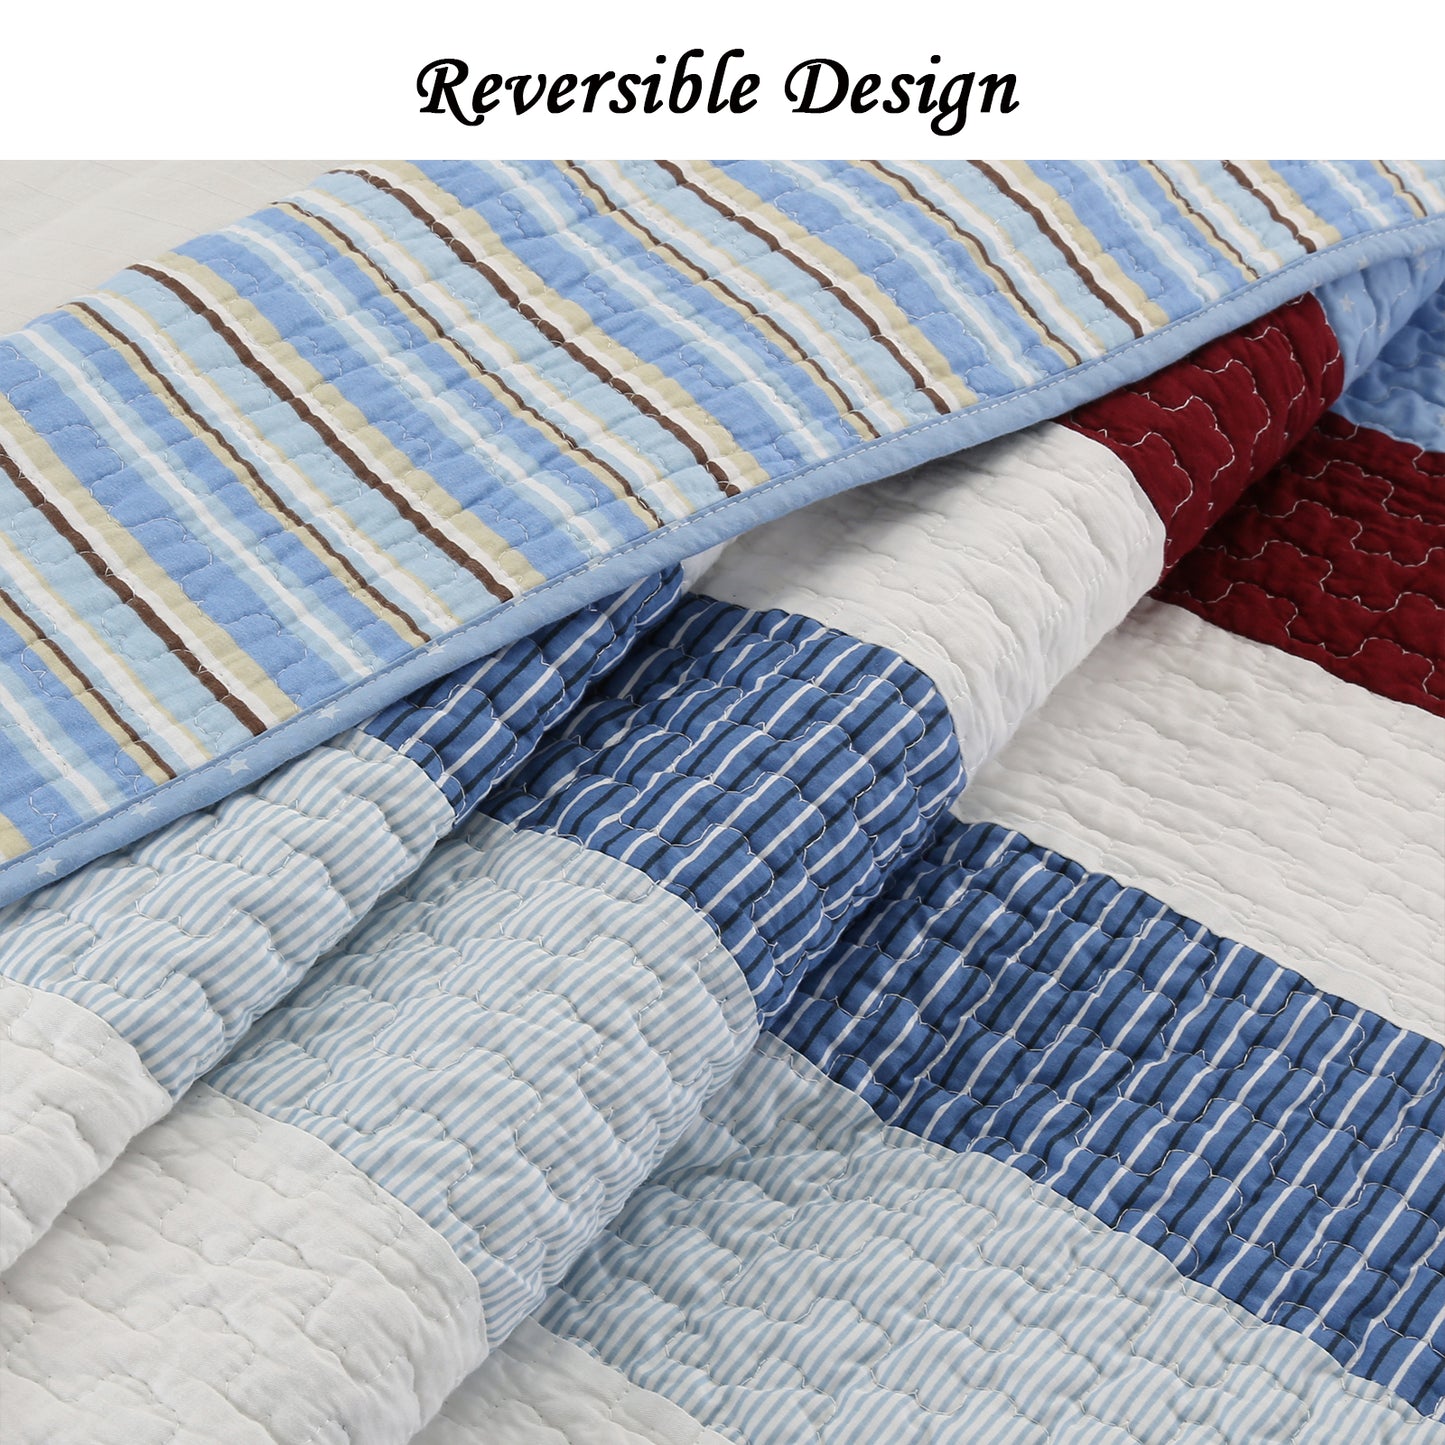 Blue Red White Striped Cotton Reversible Quilt Bedding Set